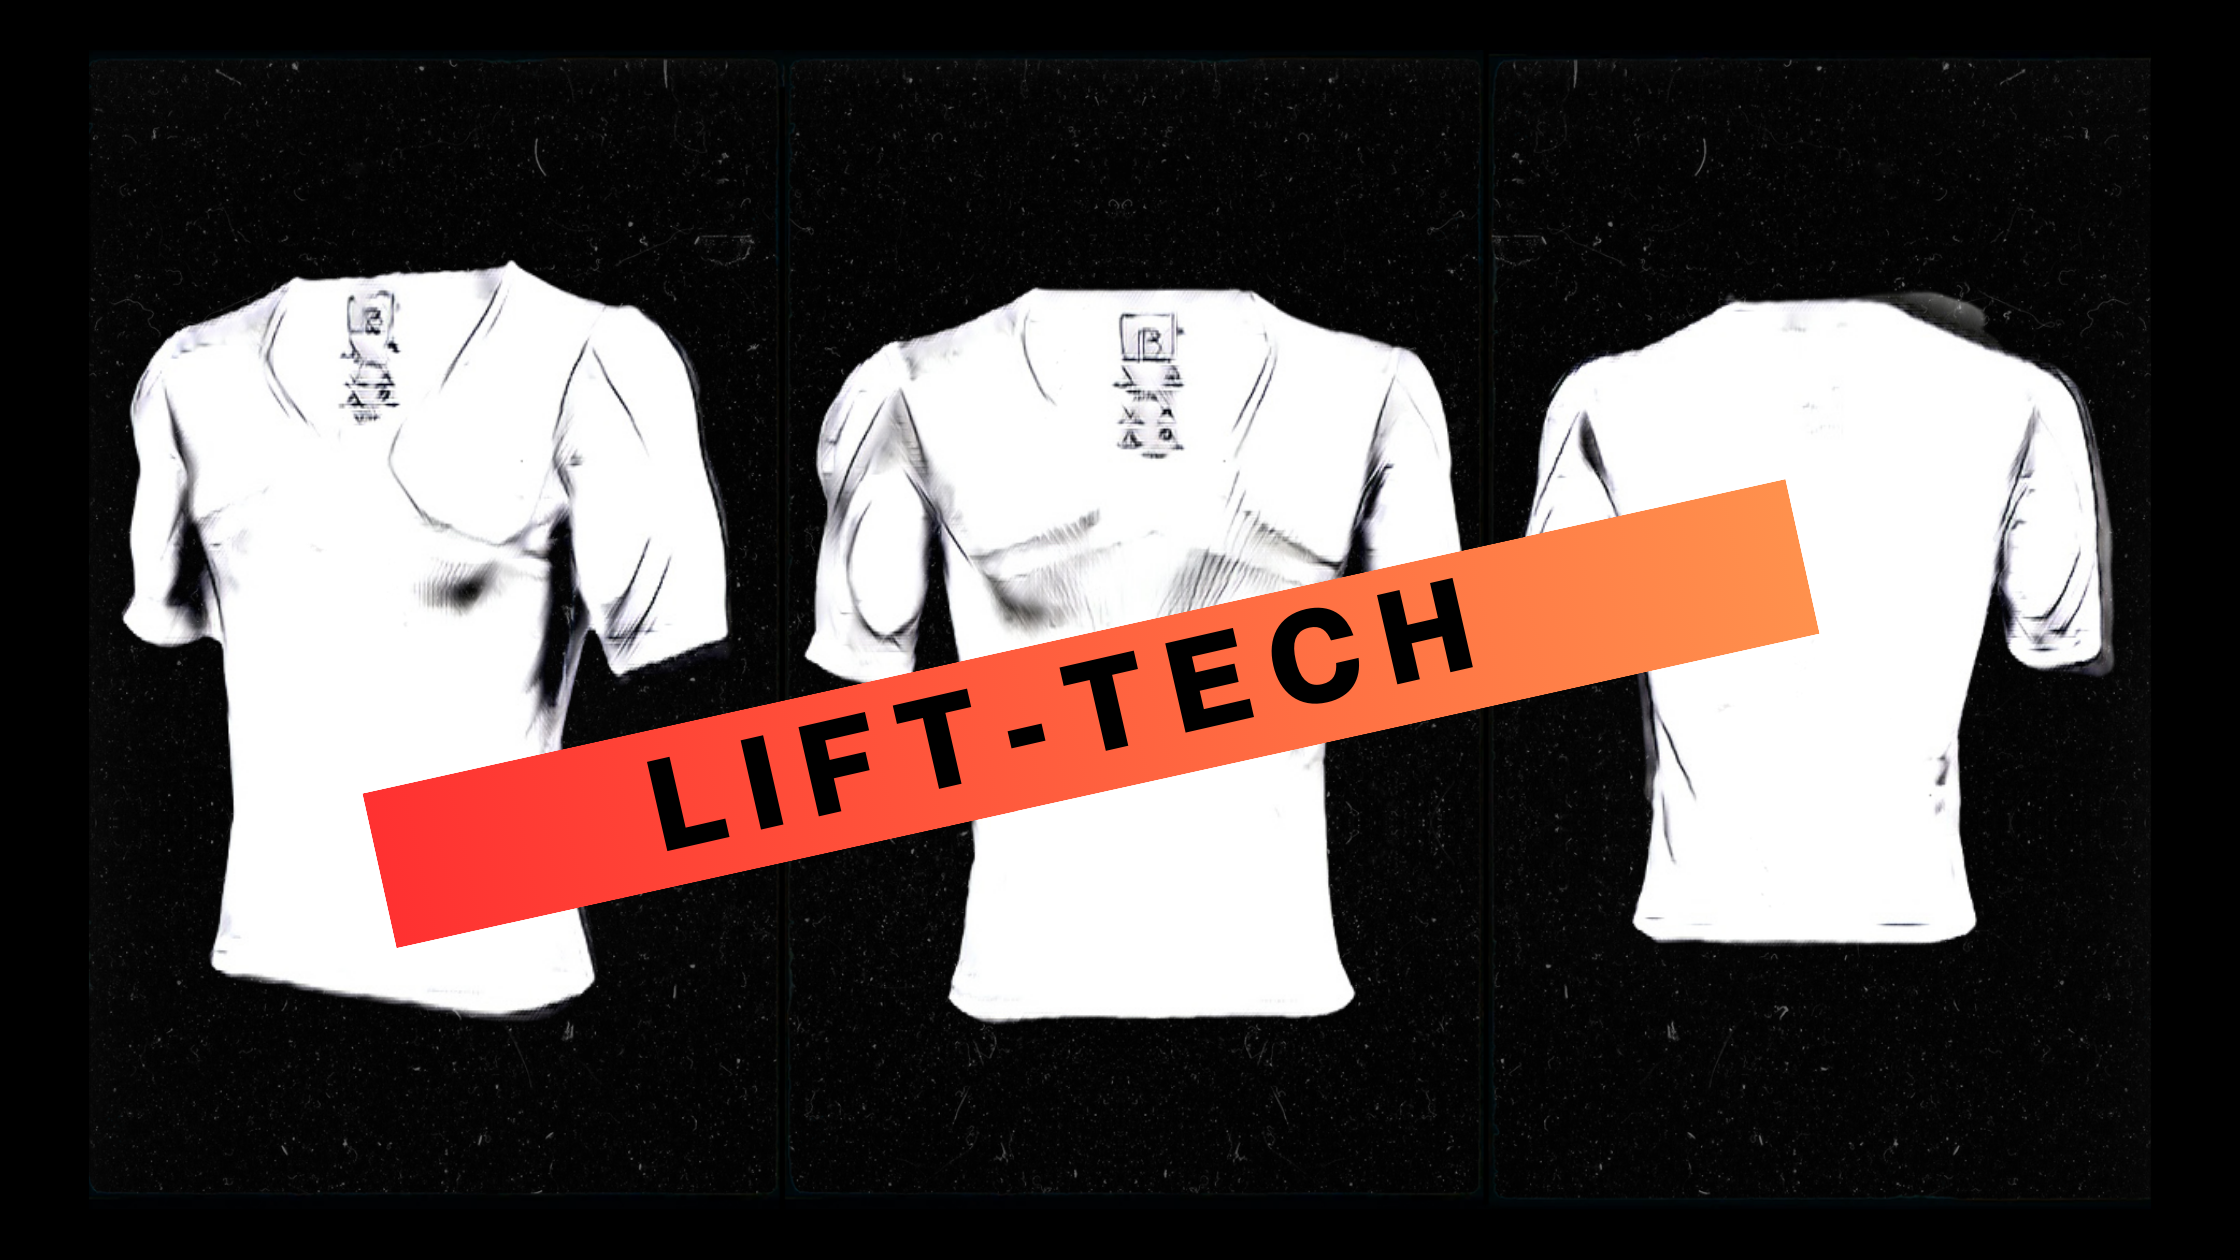 Body Tech Co. presents India's First Revolutionising Lift Tech Muscle Padded Vest for Men - Lift Tech Sketch